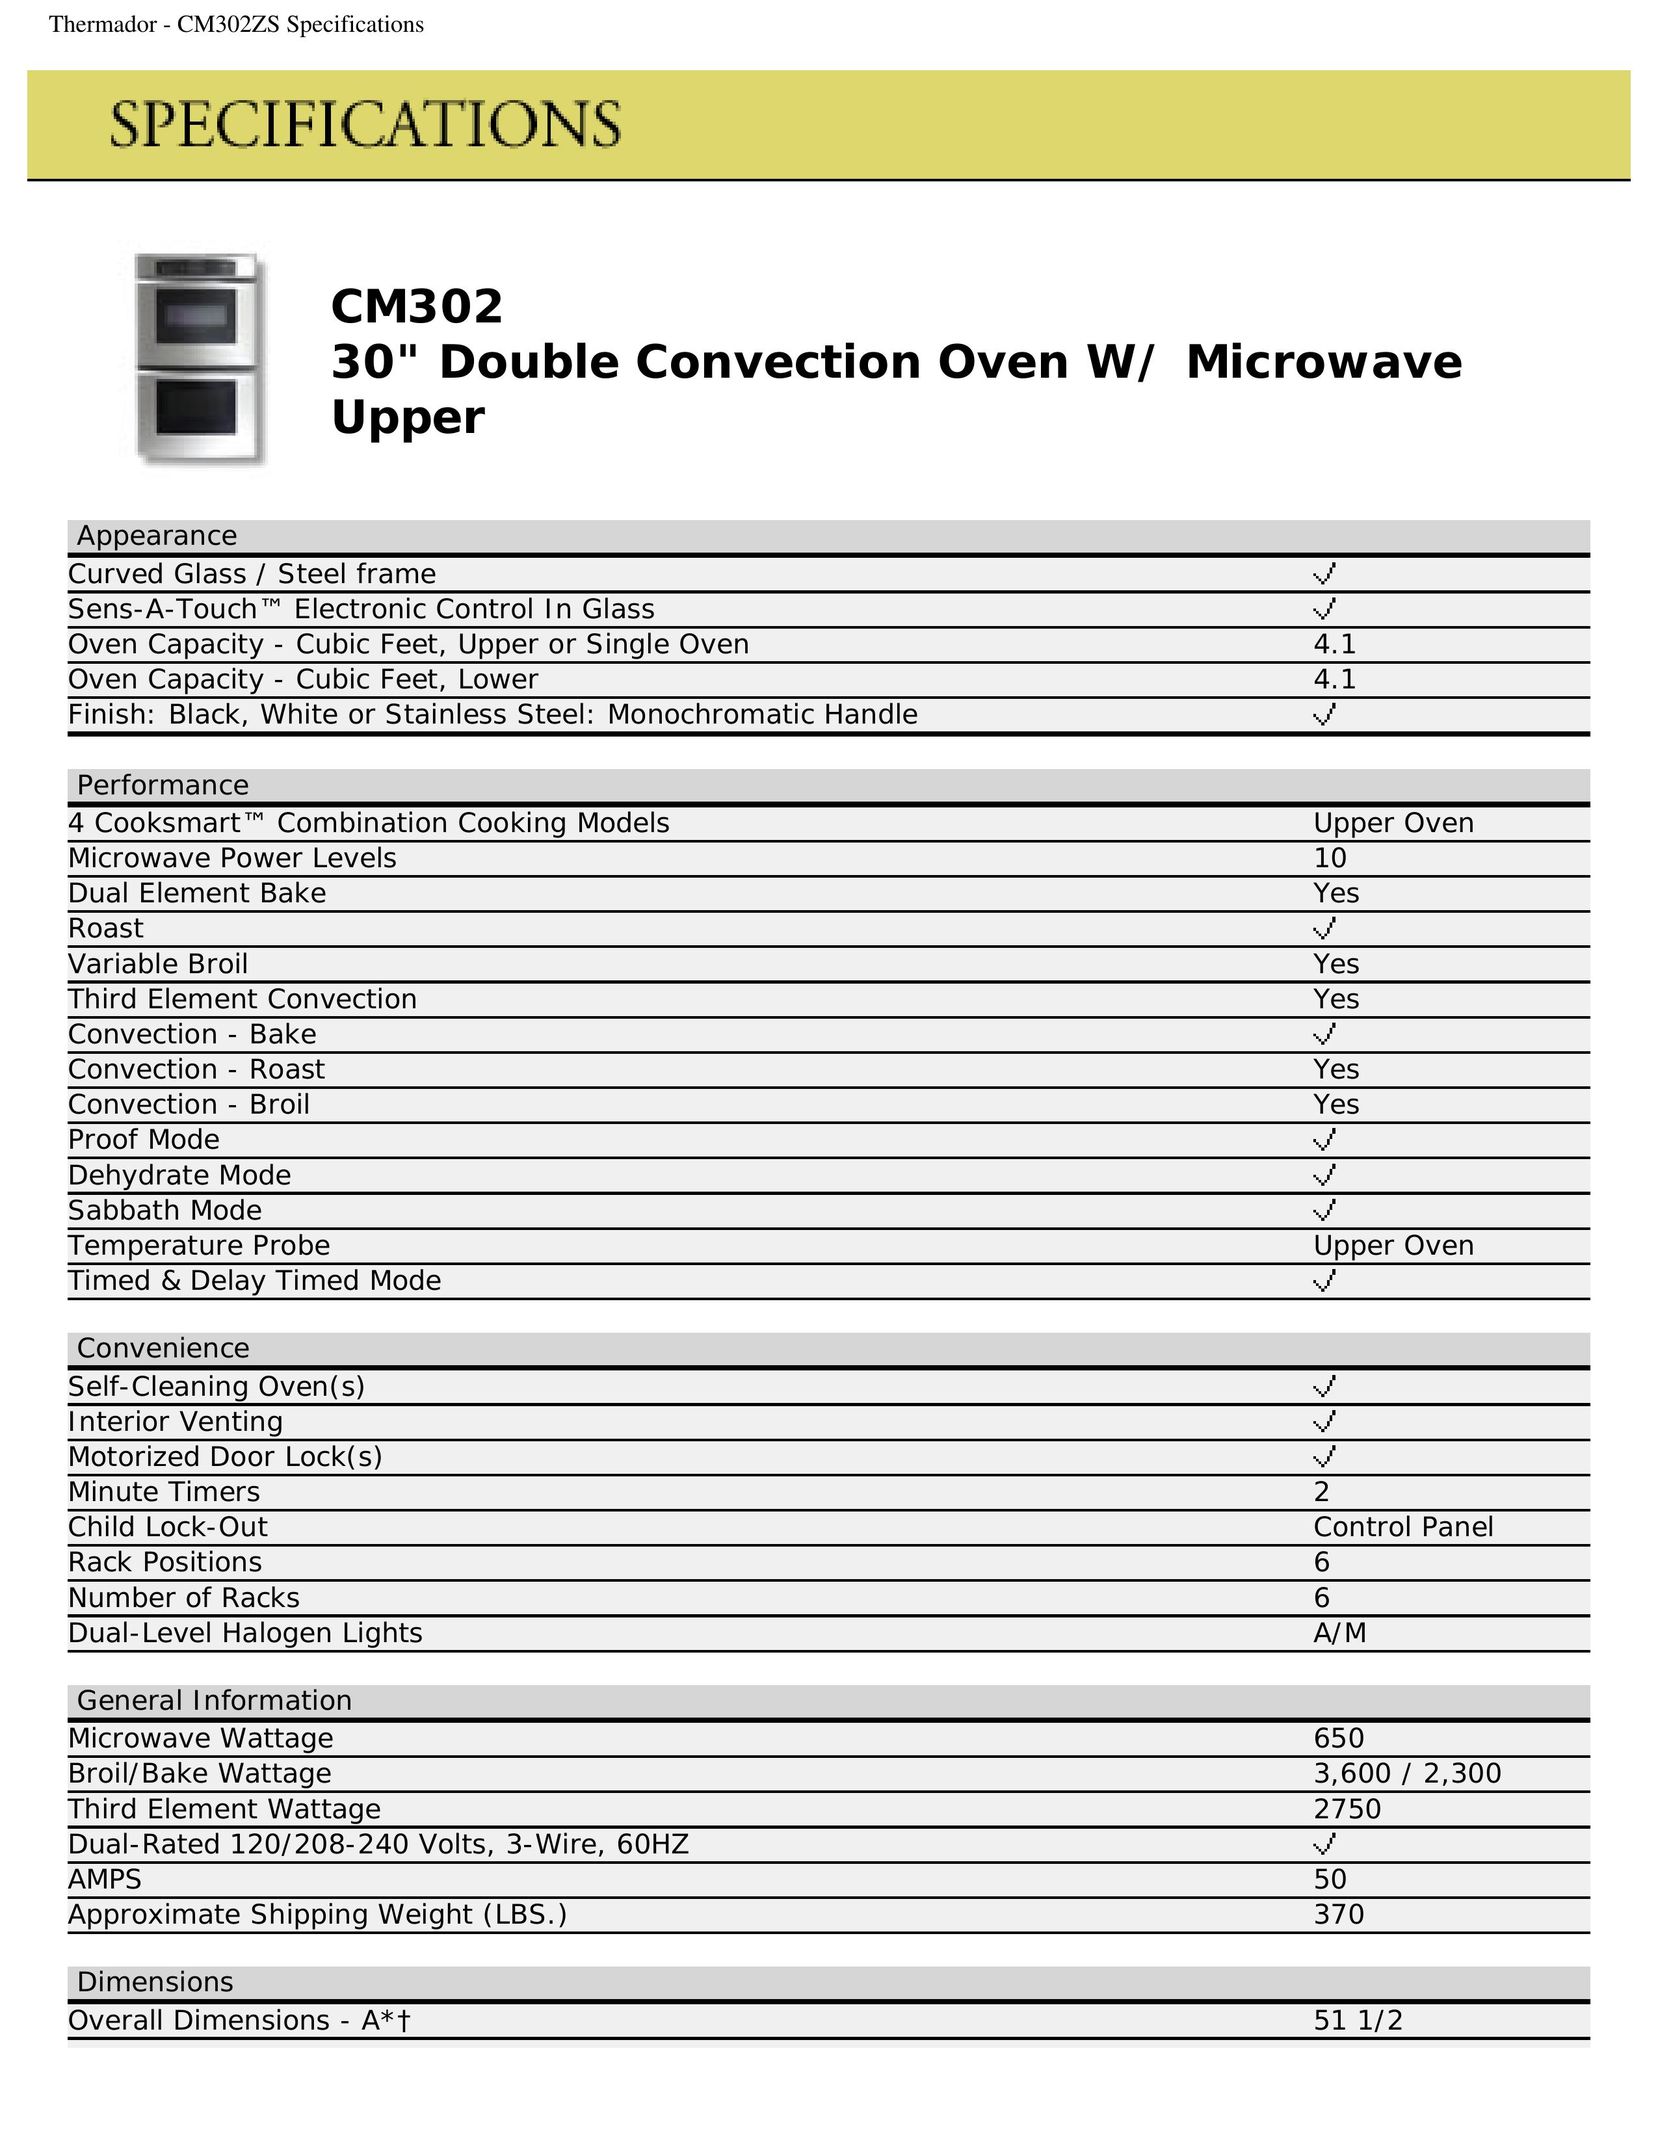 Thermador CM302 Microwave Oven User Manual